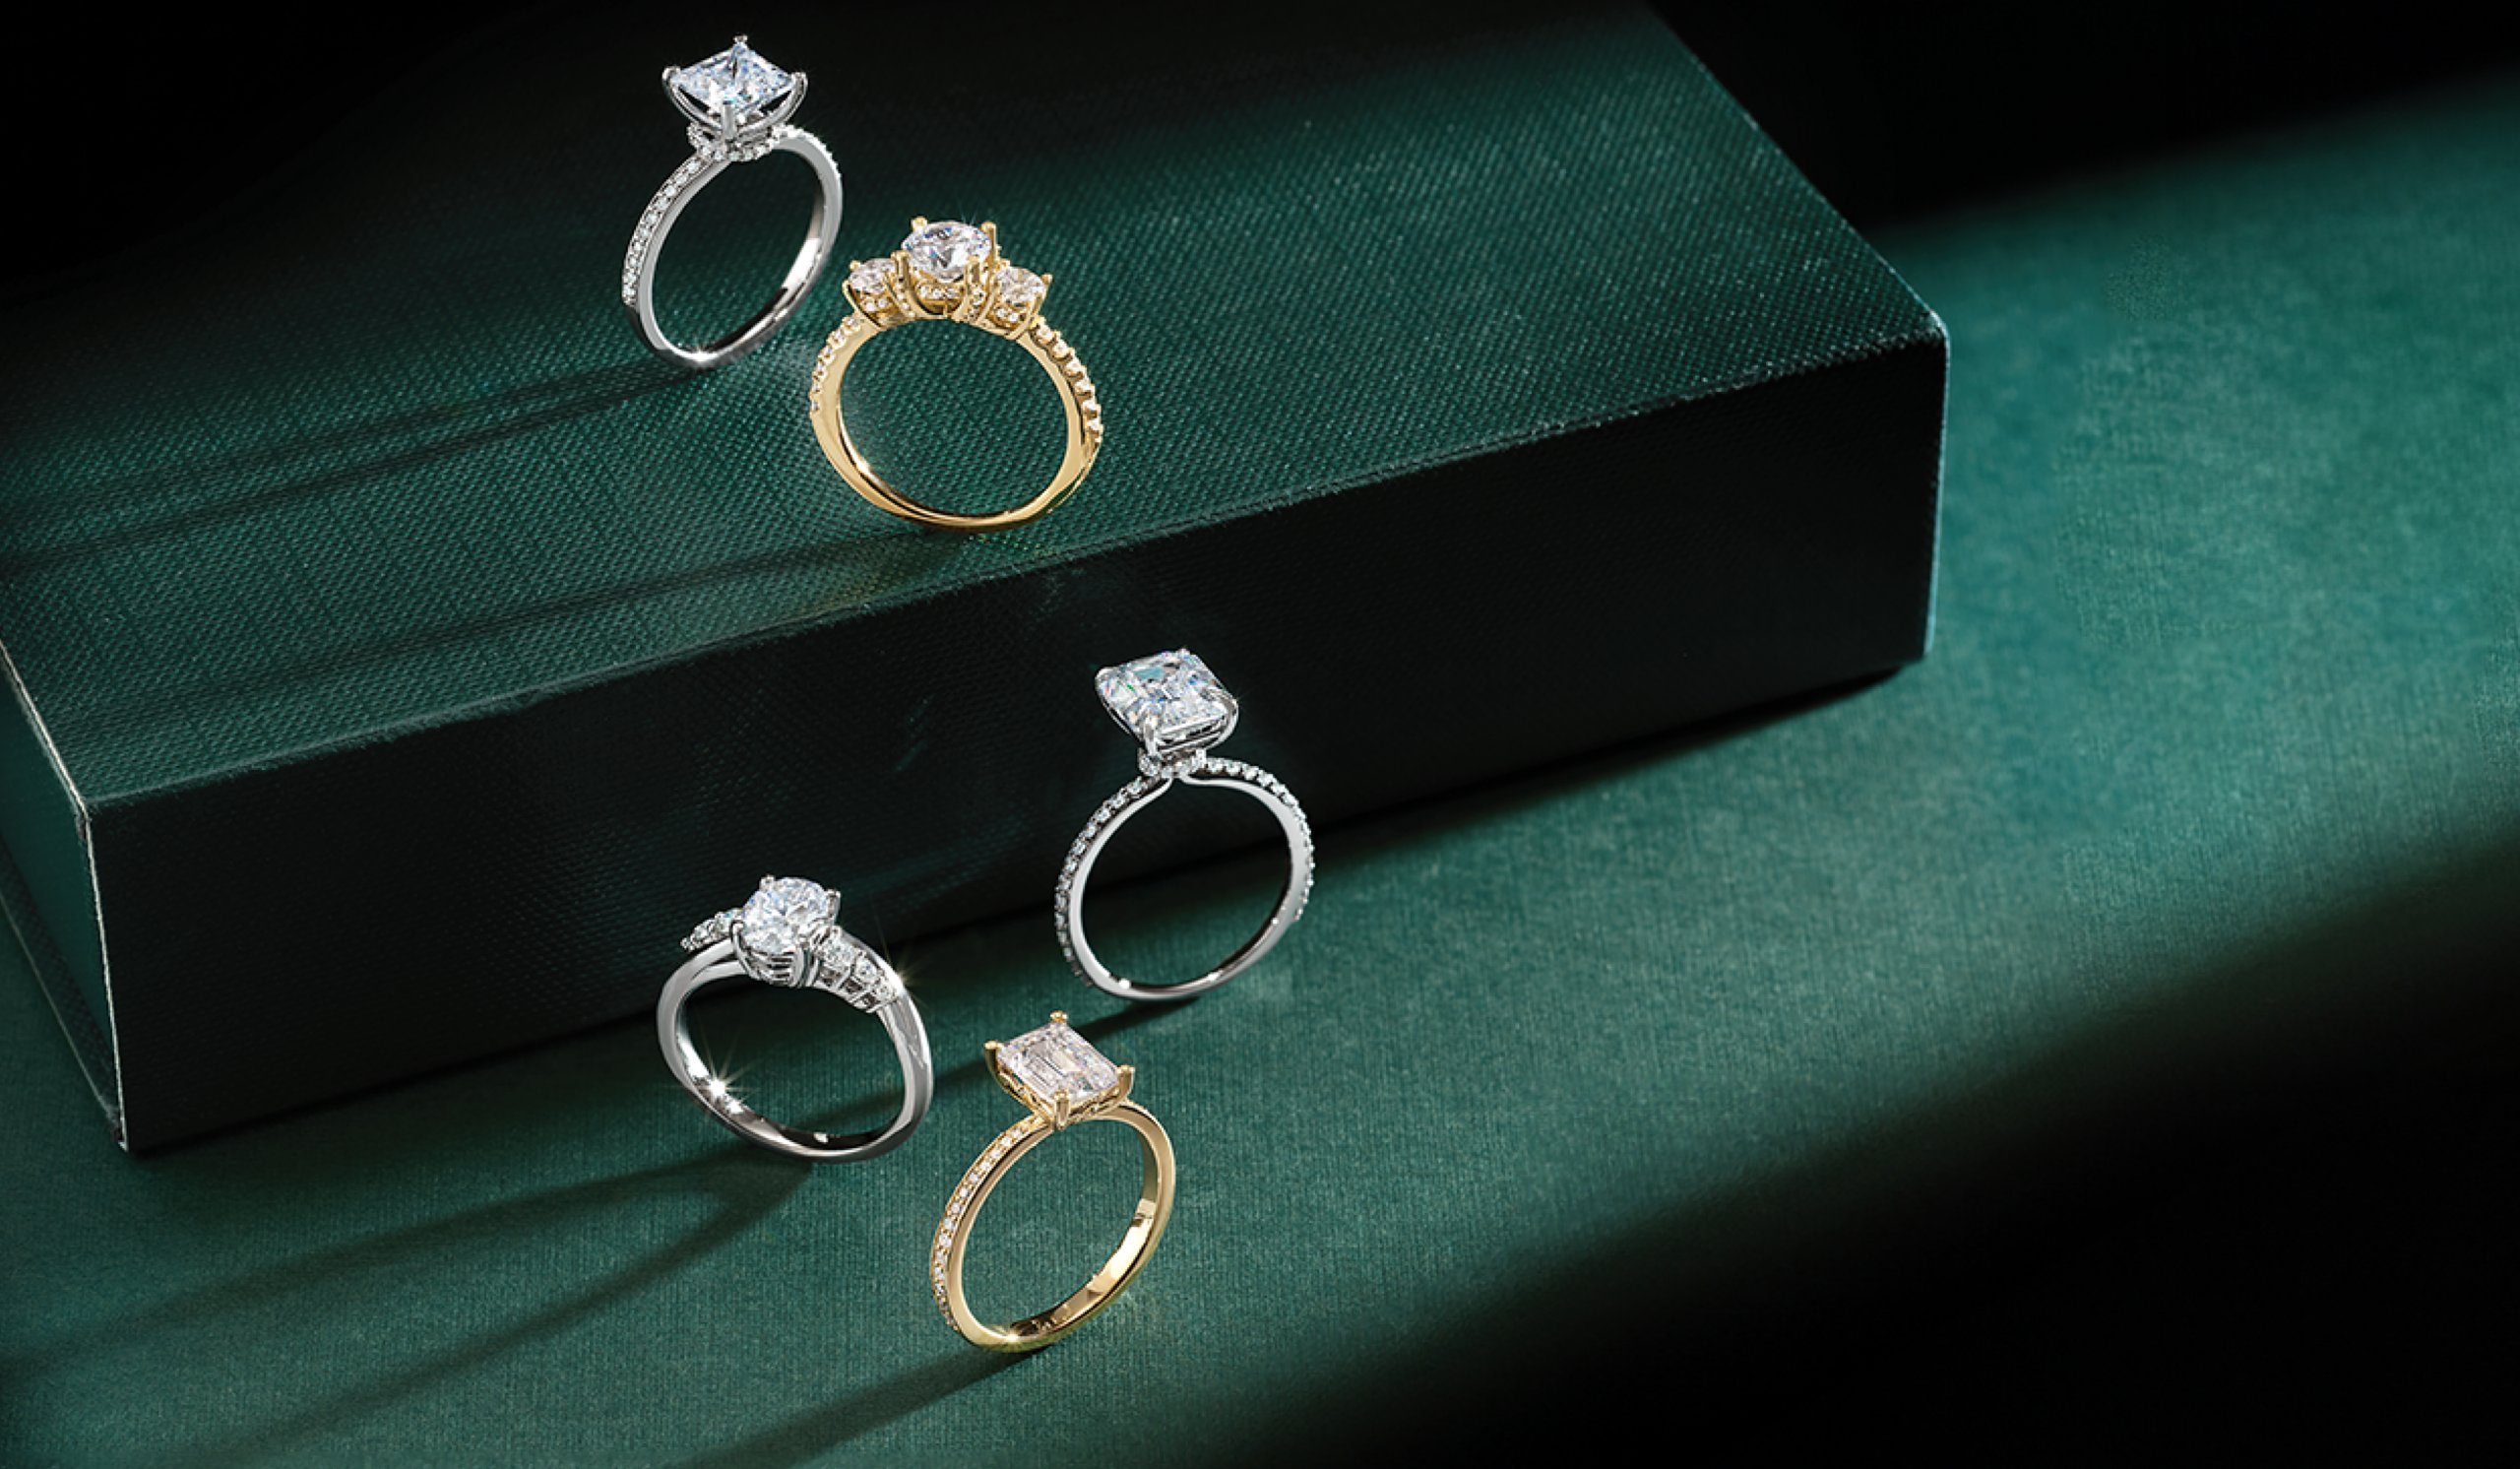 Engagement Rings and Wedding Bands